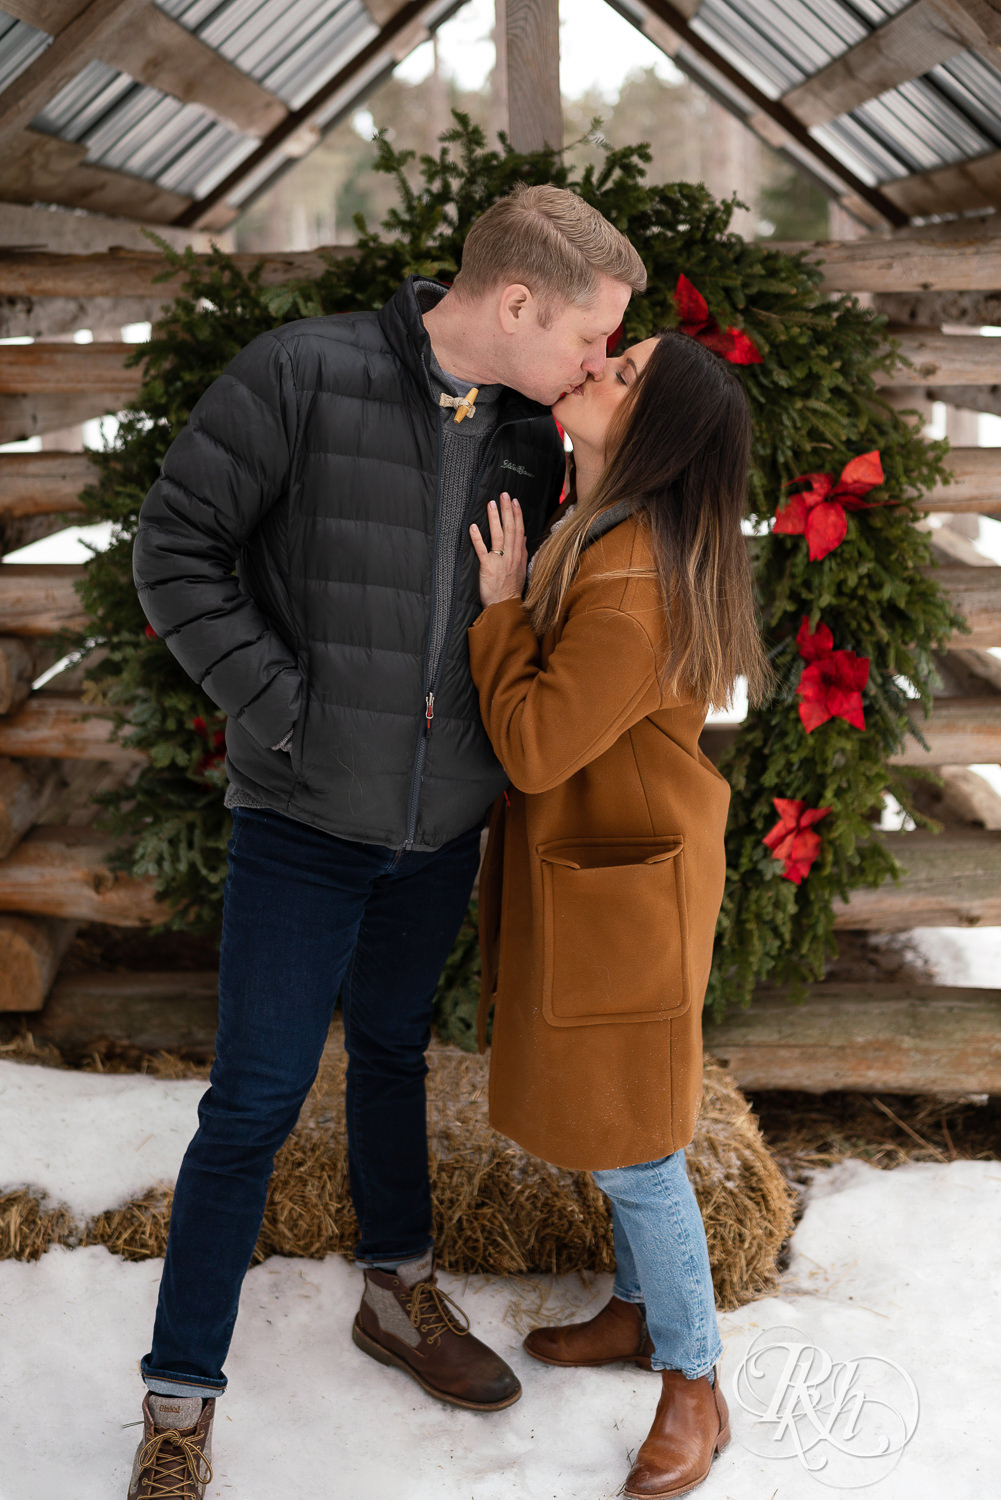 Man and woman kissing in front of Christmas wreath in the snow at Hansen Tree Farm in Anoka, Minnesota.